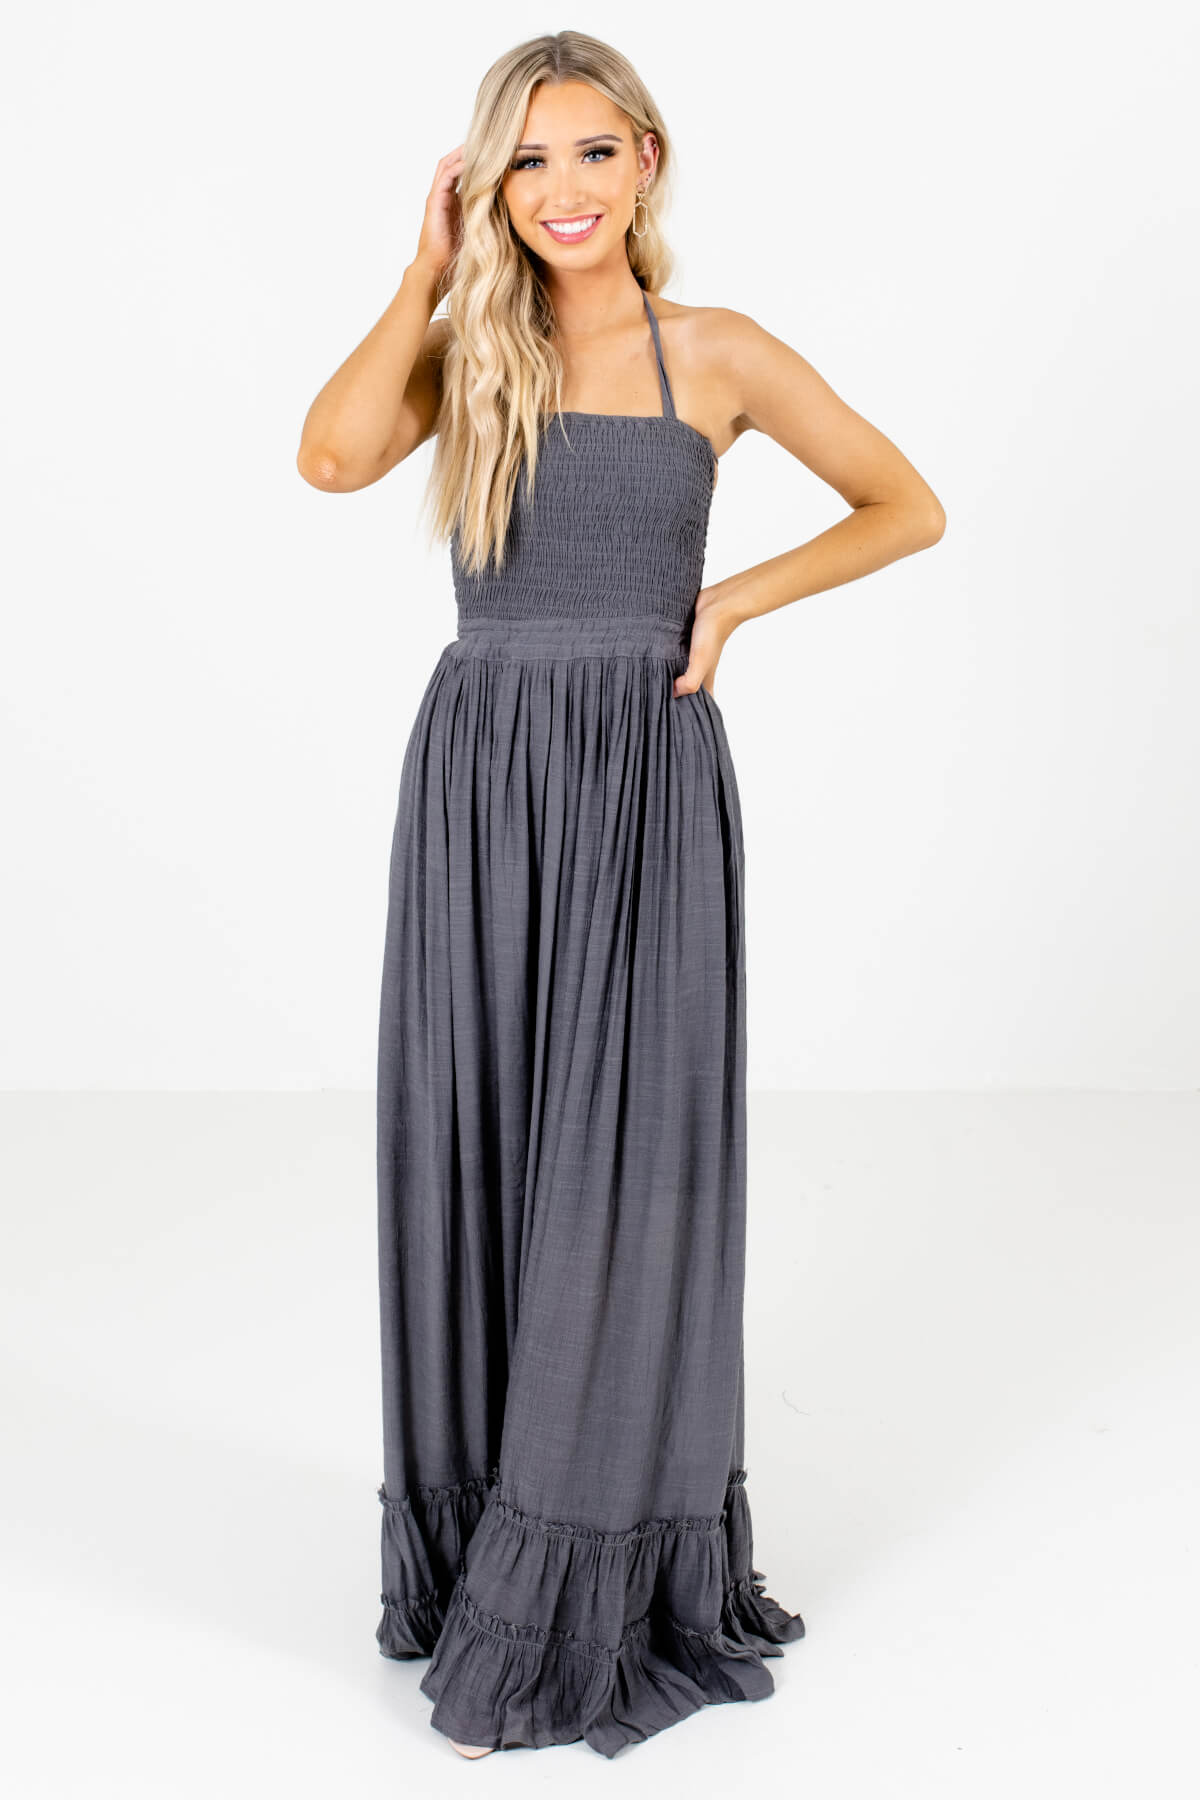 Charcoal Gray Smocked Bodice Boutique Maxi Dresses for Women